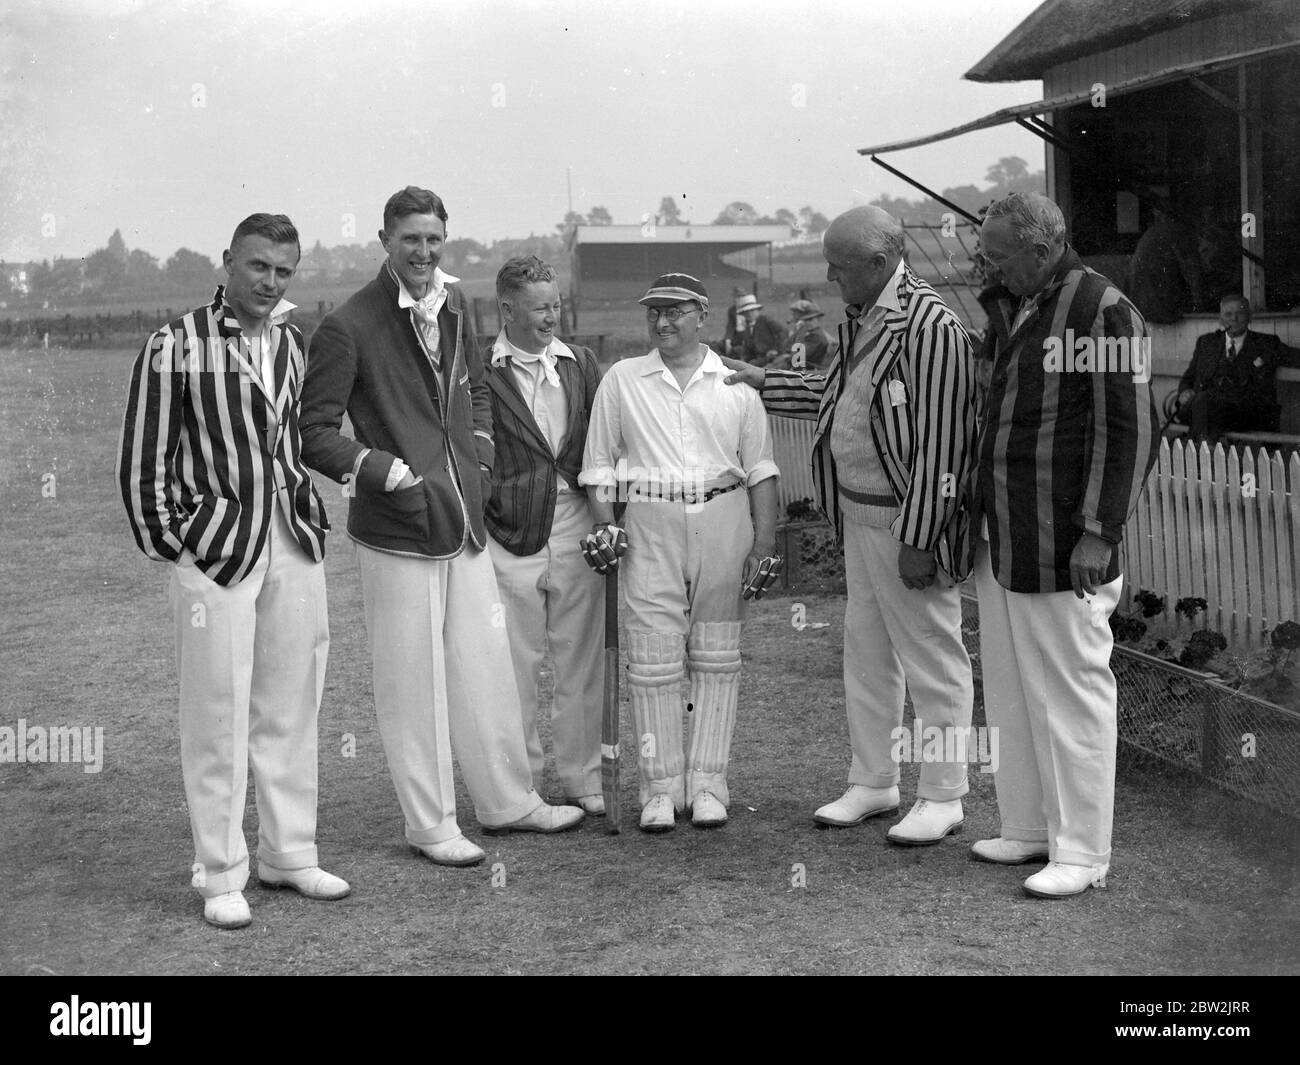 Sir W Smithers and Sir E. Campbell at a cricket match. 1934 Stock Photo